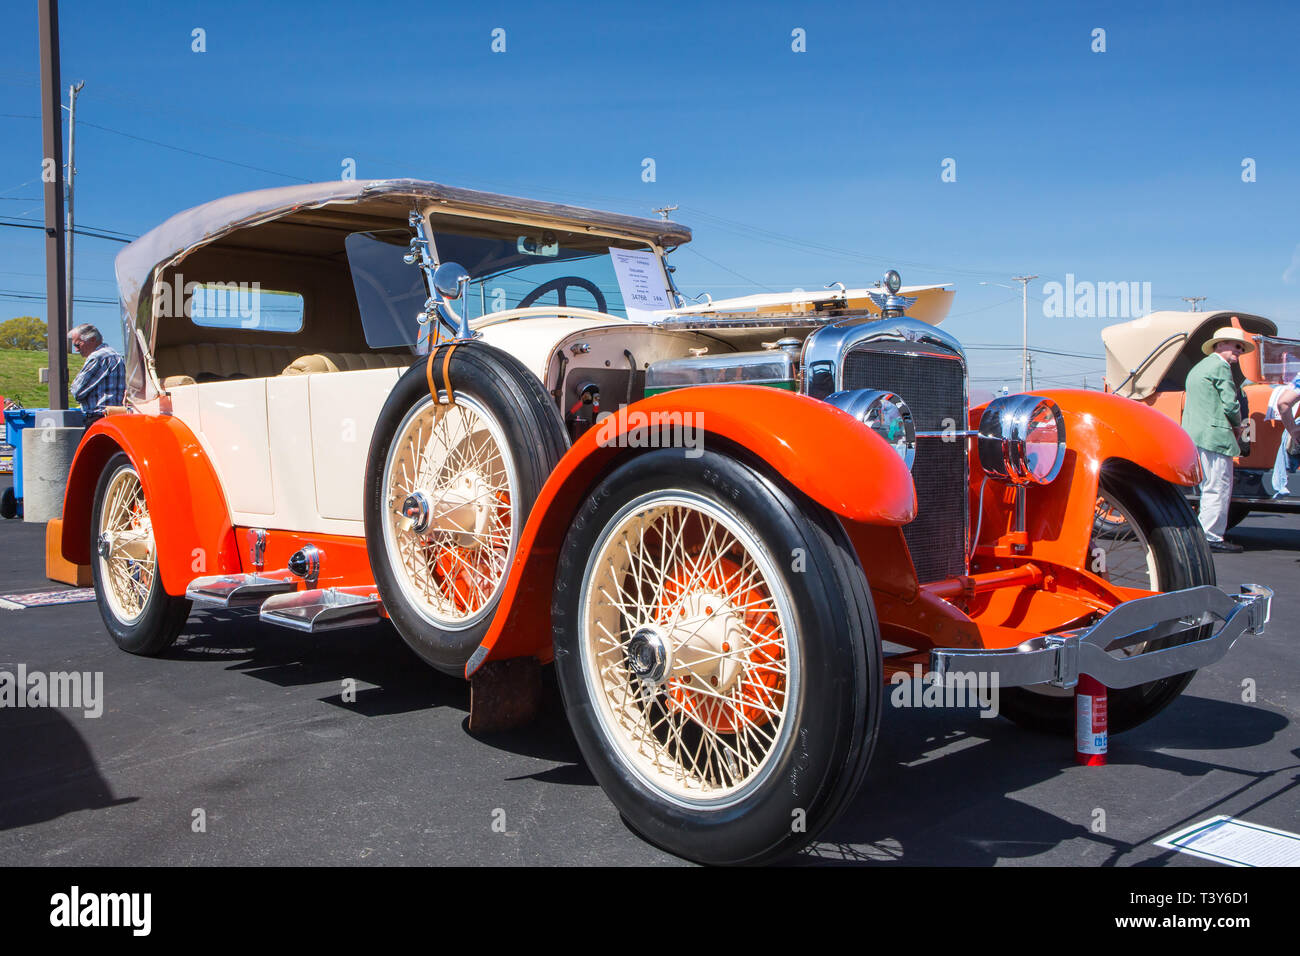 CONCORD, NC (USA) - April 6, 2019:  A 1923 Stutz Touring automobile on display at the Pennzoil AutoFair Classic Car Show at Charlotte Motor Speedway. Stock Photo